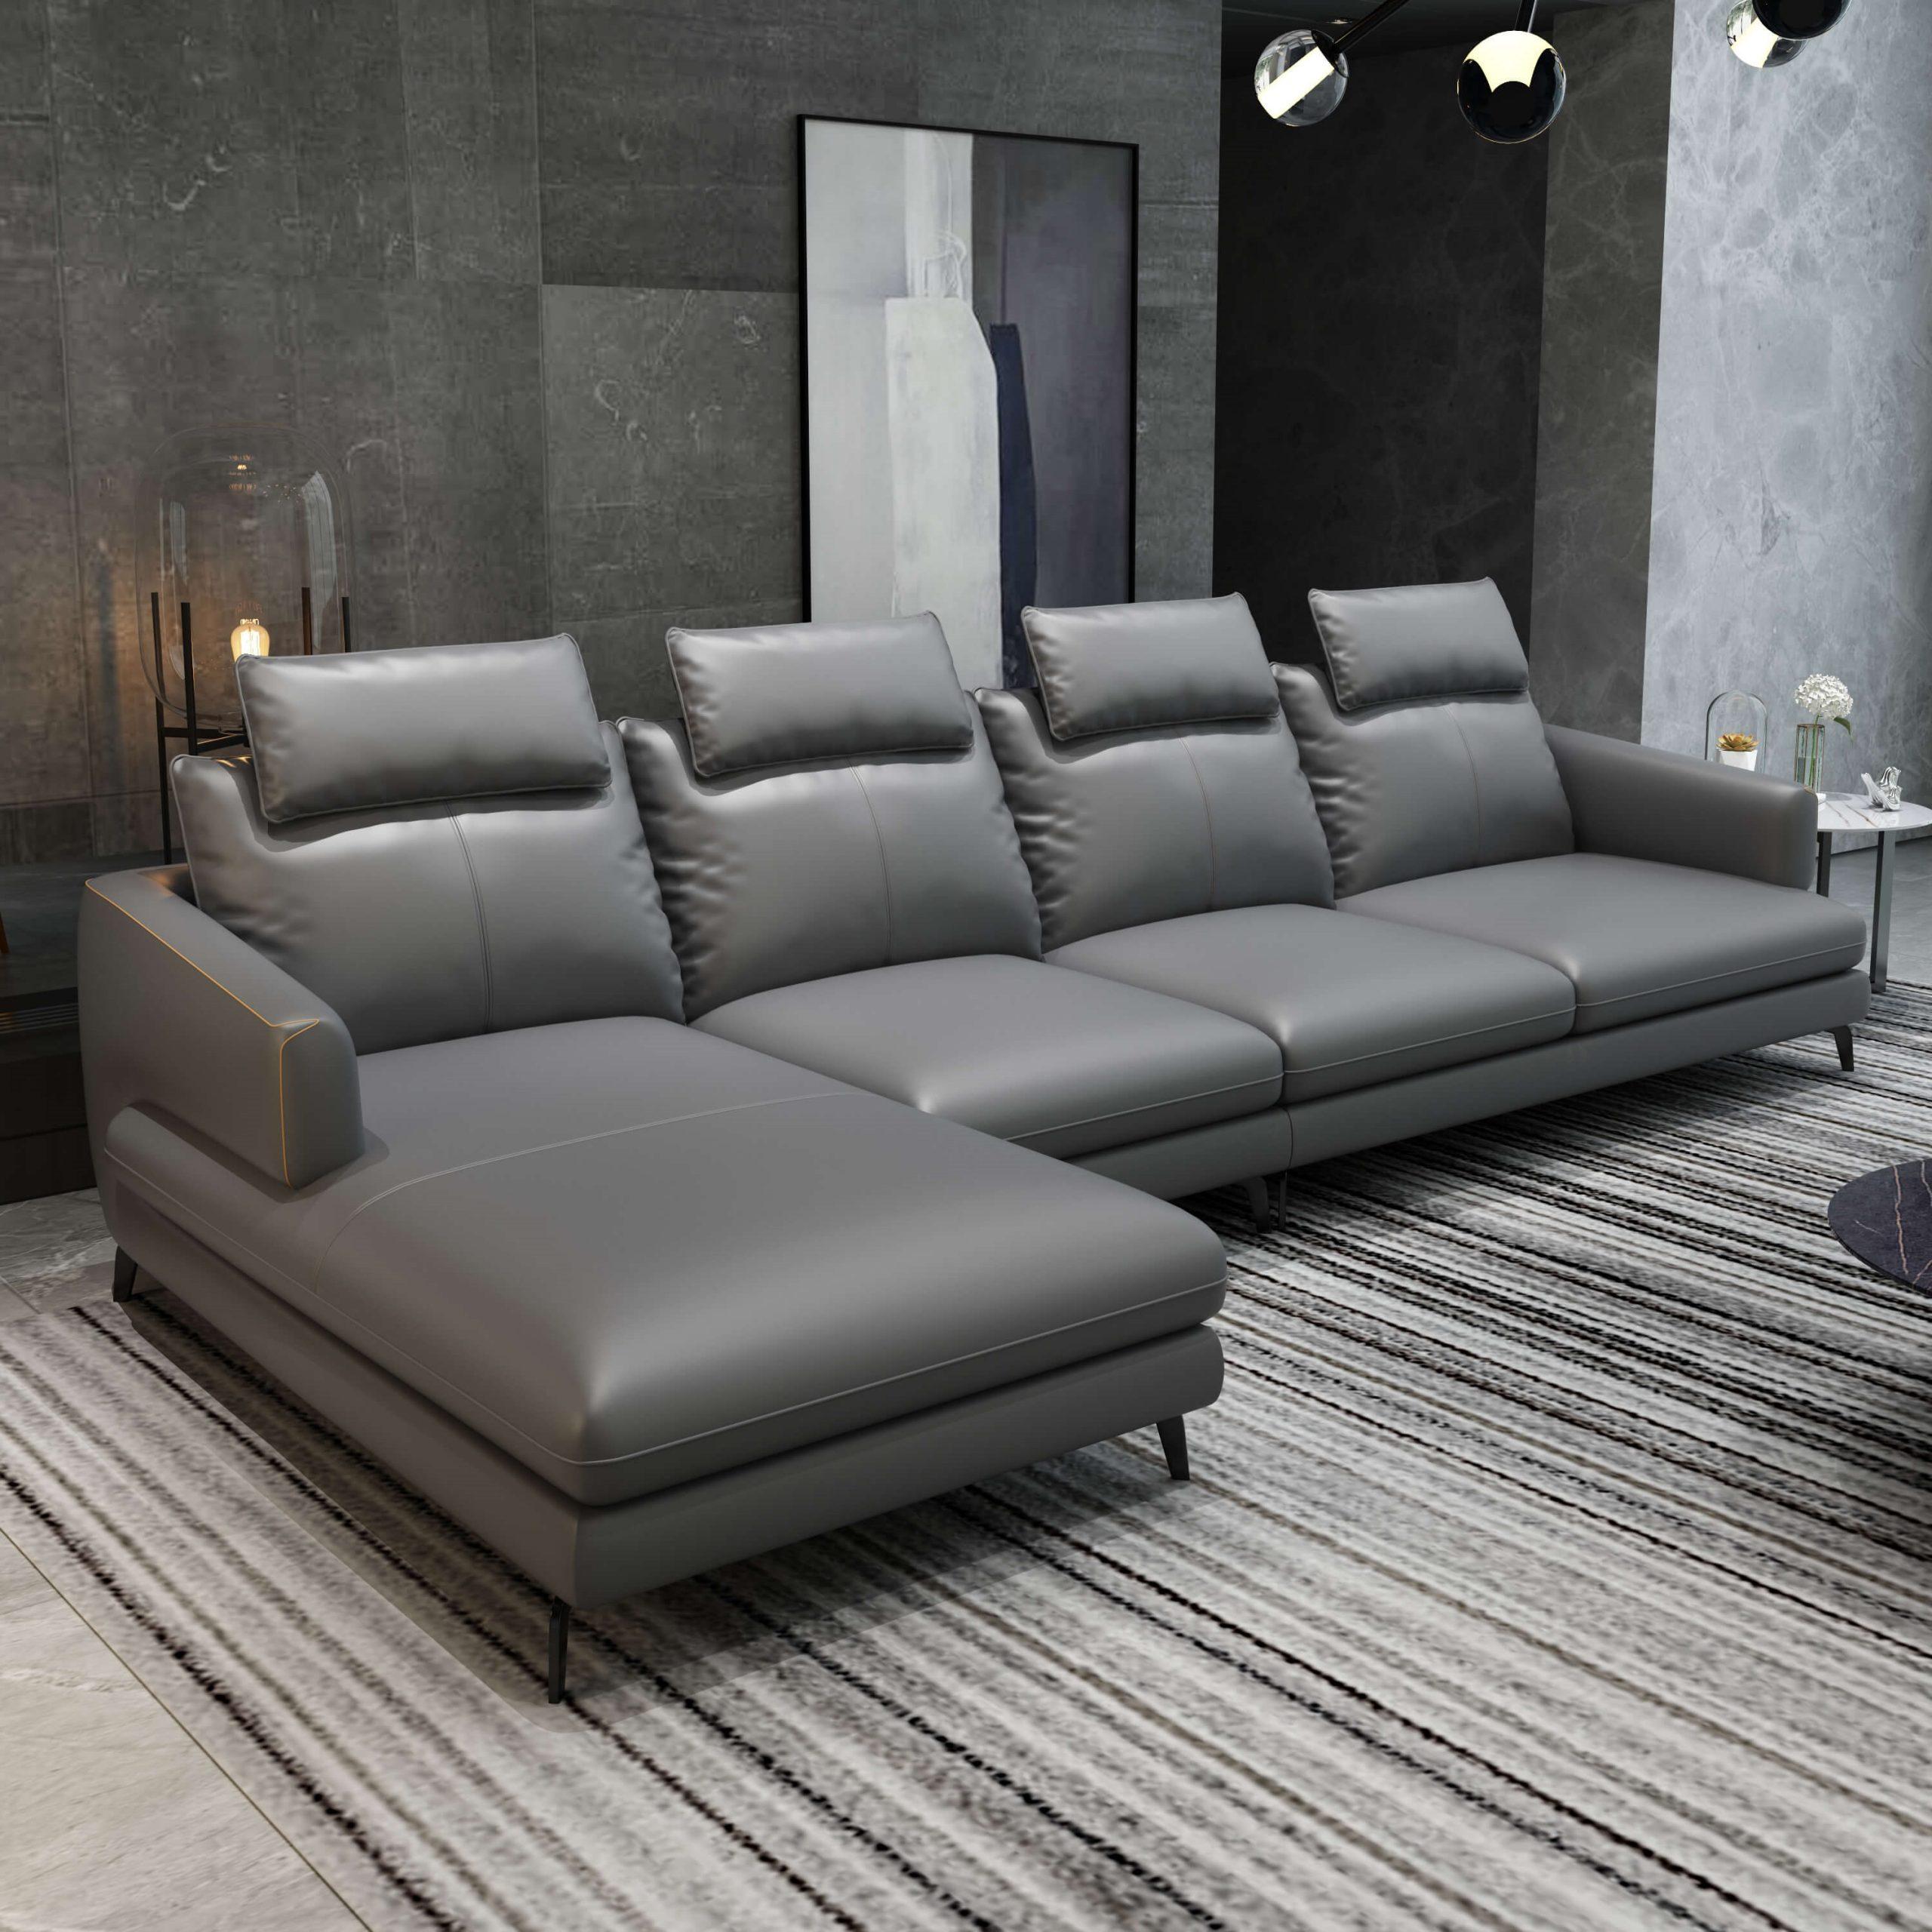 Modern, Vintage 4 Seater Sectional Sofa MARCONI EF-74539L-3LHF in Smoked, Gray Italian Leather